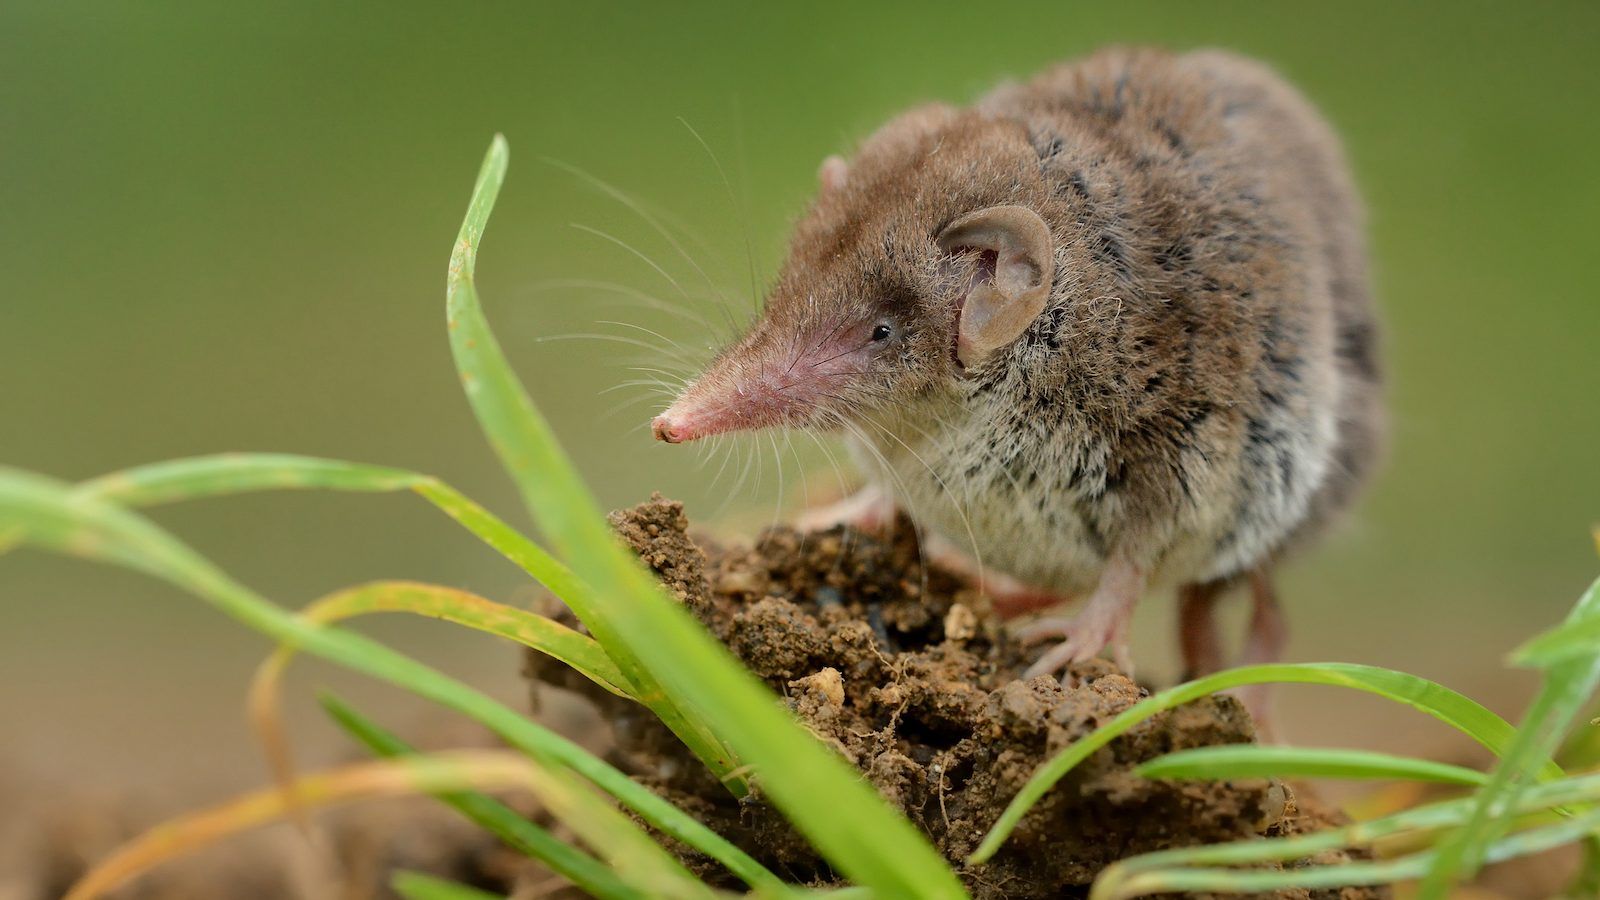 Researchers found the langya virus in more than a quarter of the 262 shrews they tested. GETTY